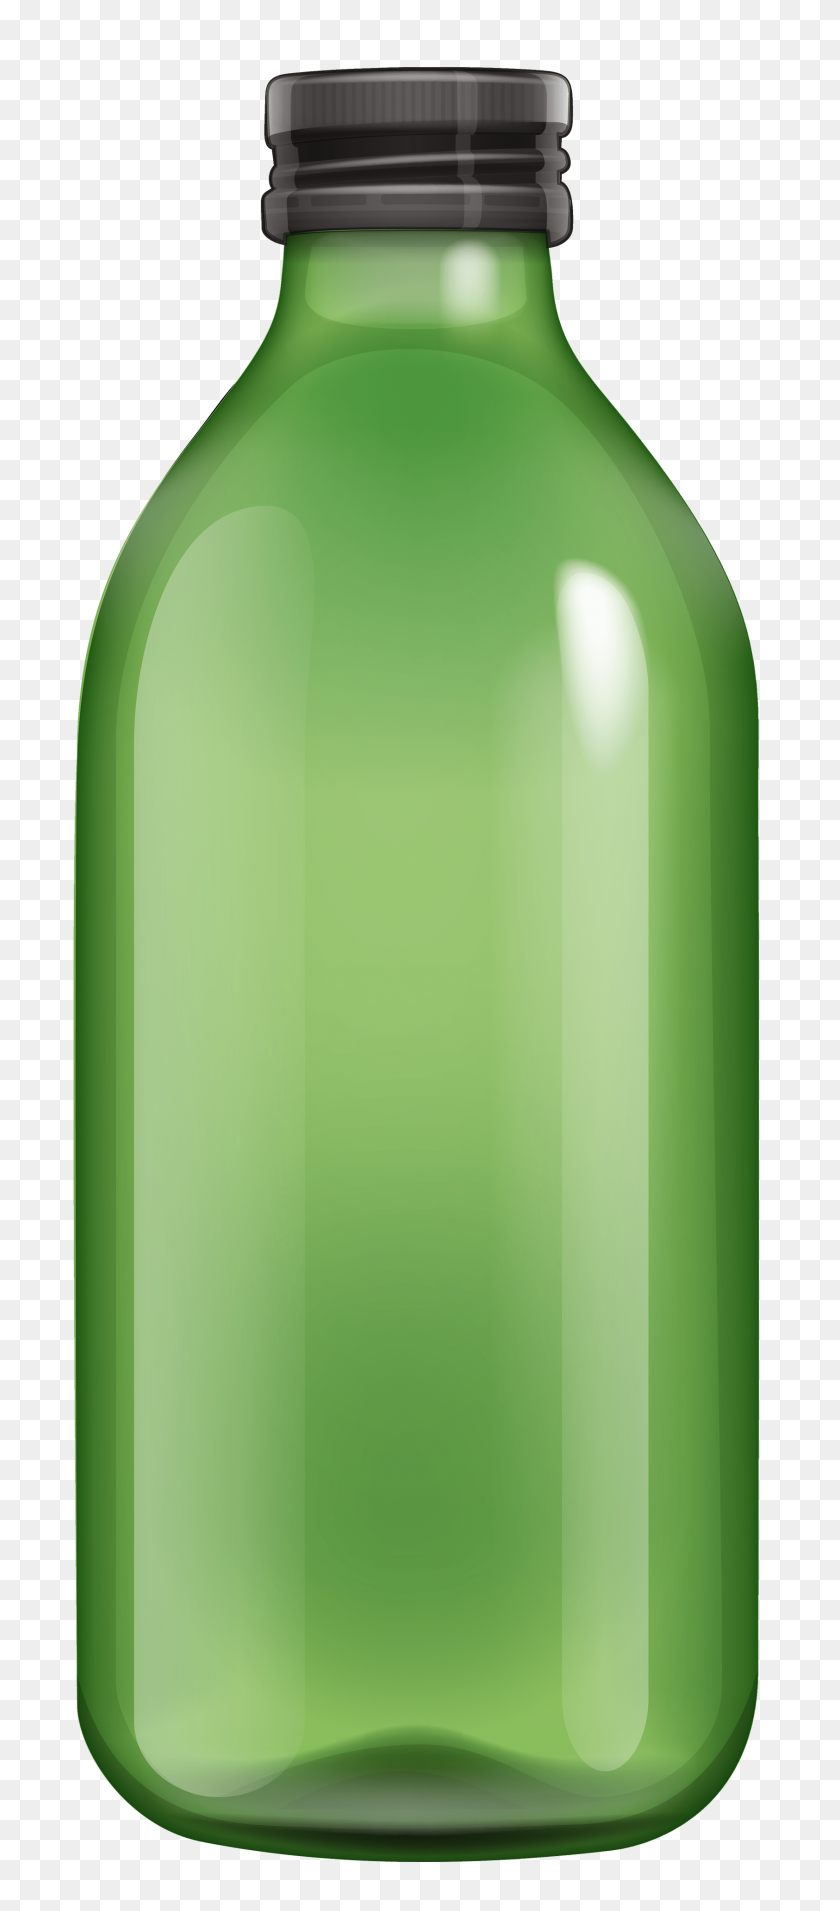 1685x4000 Meaning Of Signs In Plastic Bottles - Plastic Bottle PNG